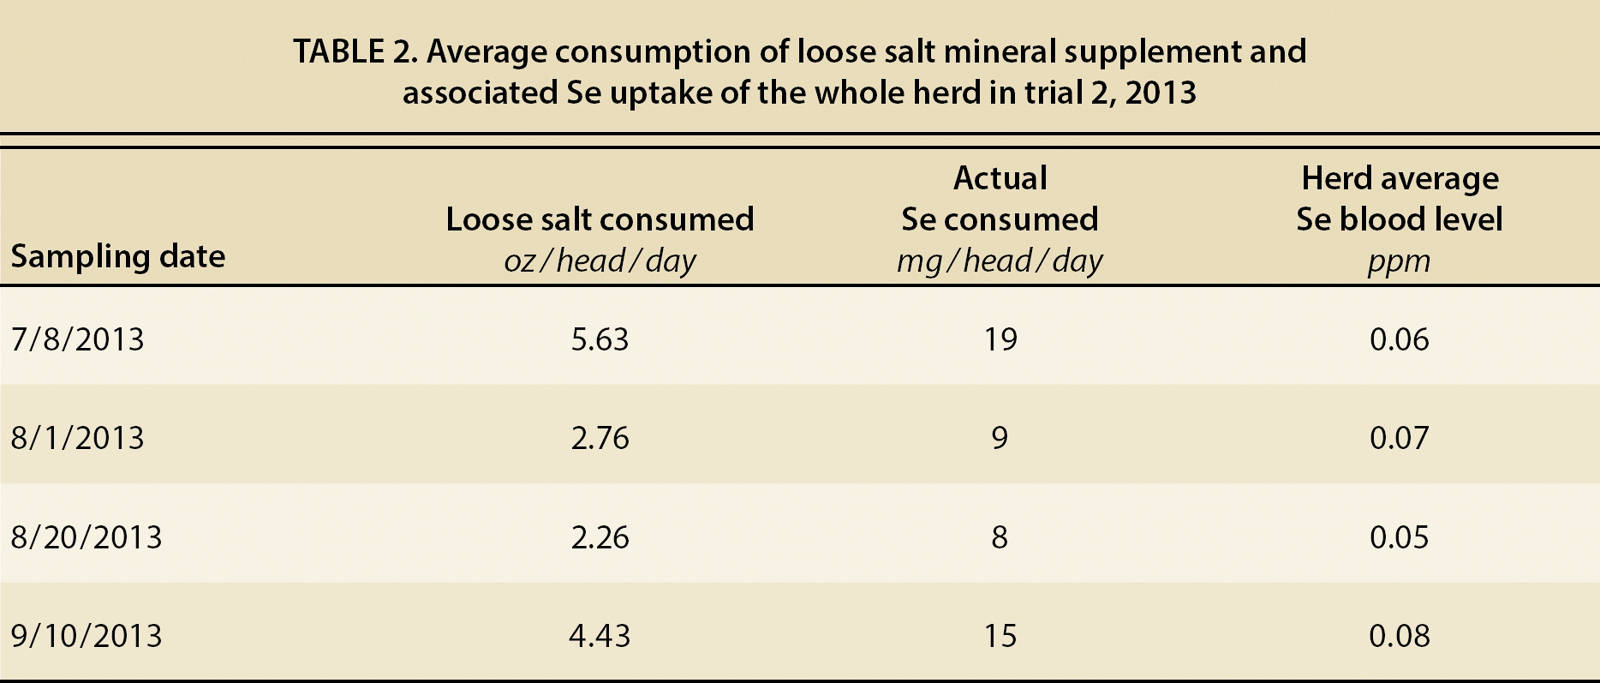 Average consumption of loose salt mineral supplement and associated Se uptake of the whole herd in trial 2, 2013